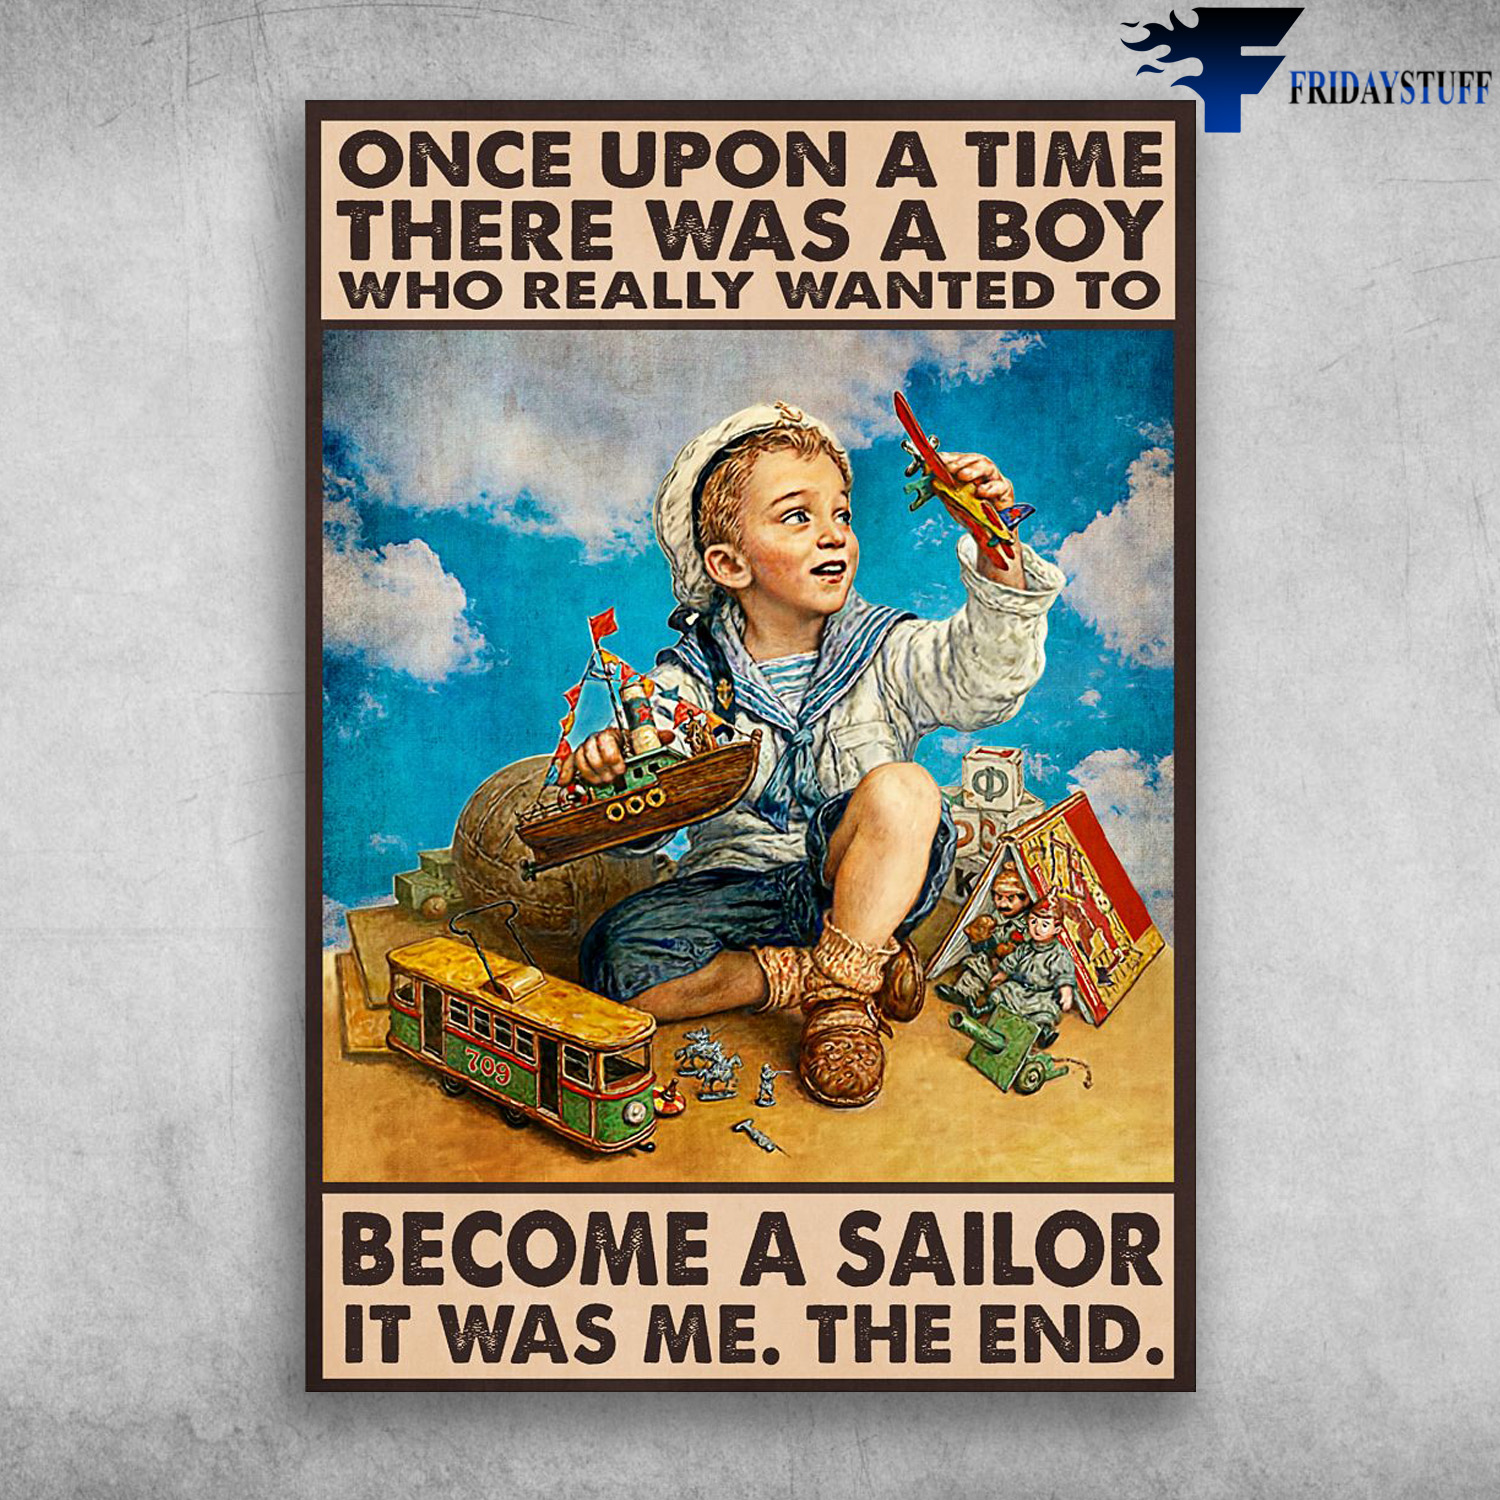 Sailor Boy - Once Upon A Time, There Was A Boy, Who Really Wantted To Becme A Sailor, It Was Me, The End